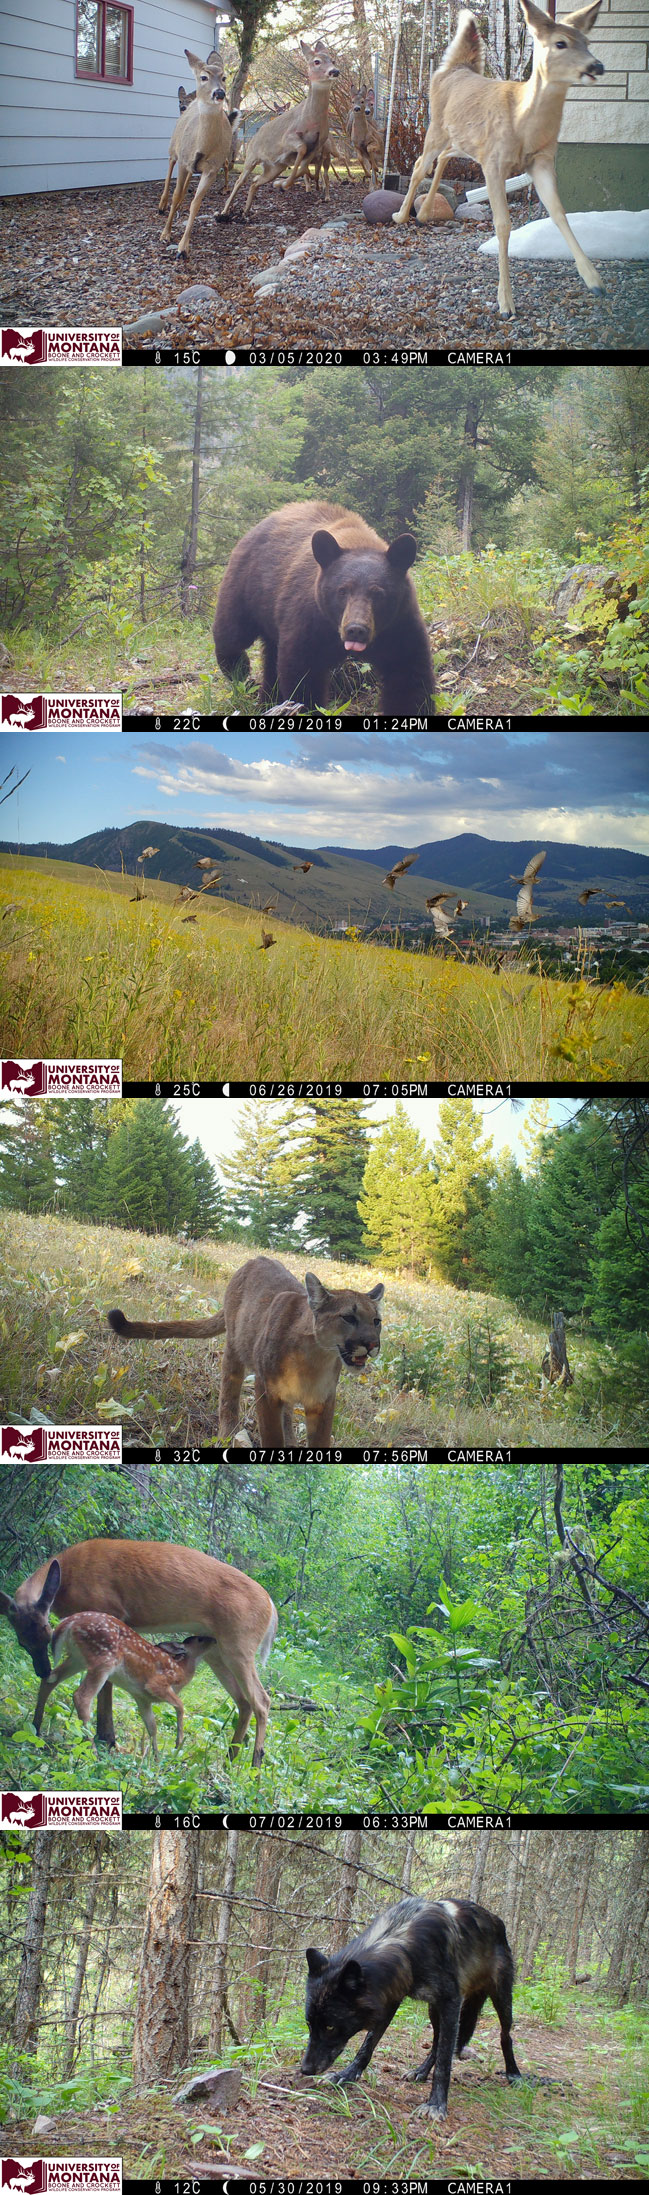 Trail camera pictures of urban deer, a black beer, birds in flight, a mountain lion, a deer nursing is fawn and a wolf.